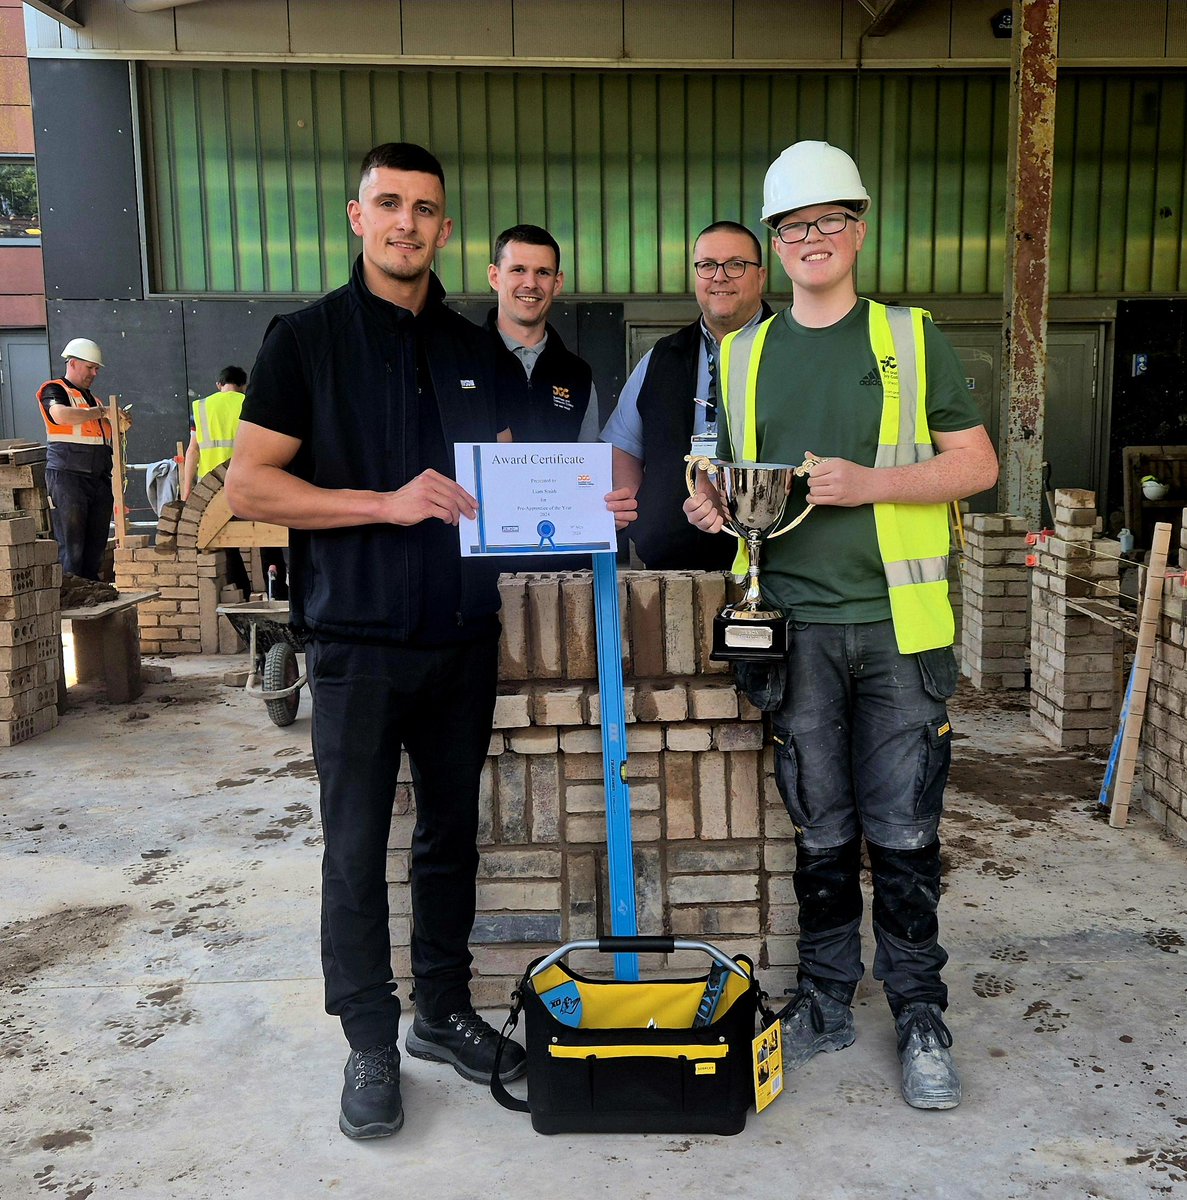 🏆 We're thrilled to congratulate Liam Smith for receiving the Silver Trowel Award trophy & tool kit in recognition of his outstanding performance in our pre-apprentice bricklaying course! 🏅🔧

Many thanks to Jewsons Dumfries for presenting this beautiful trophy & support.